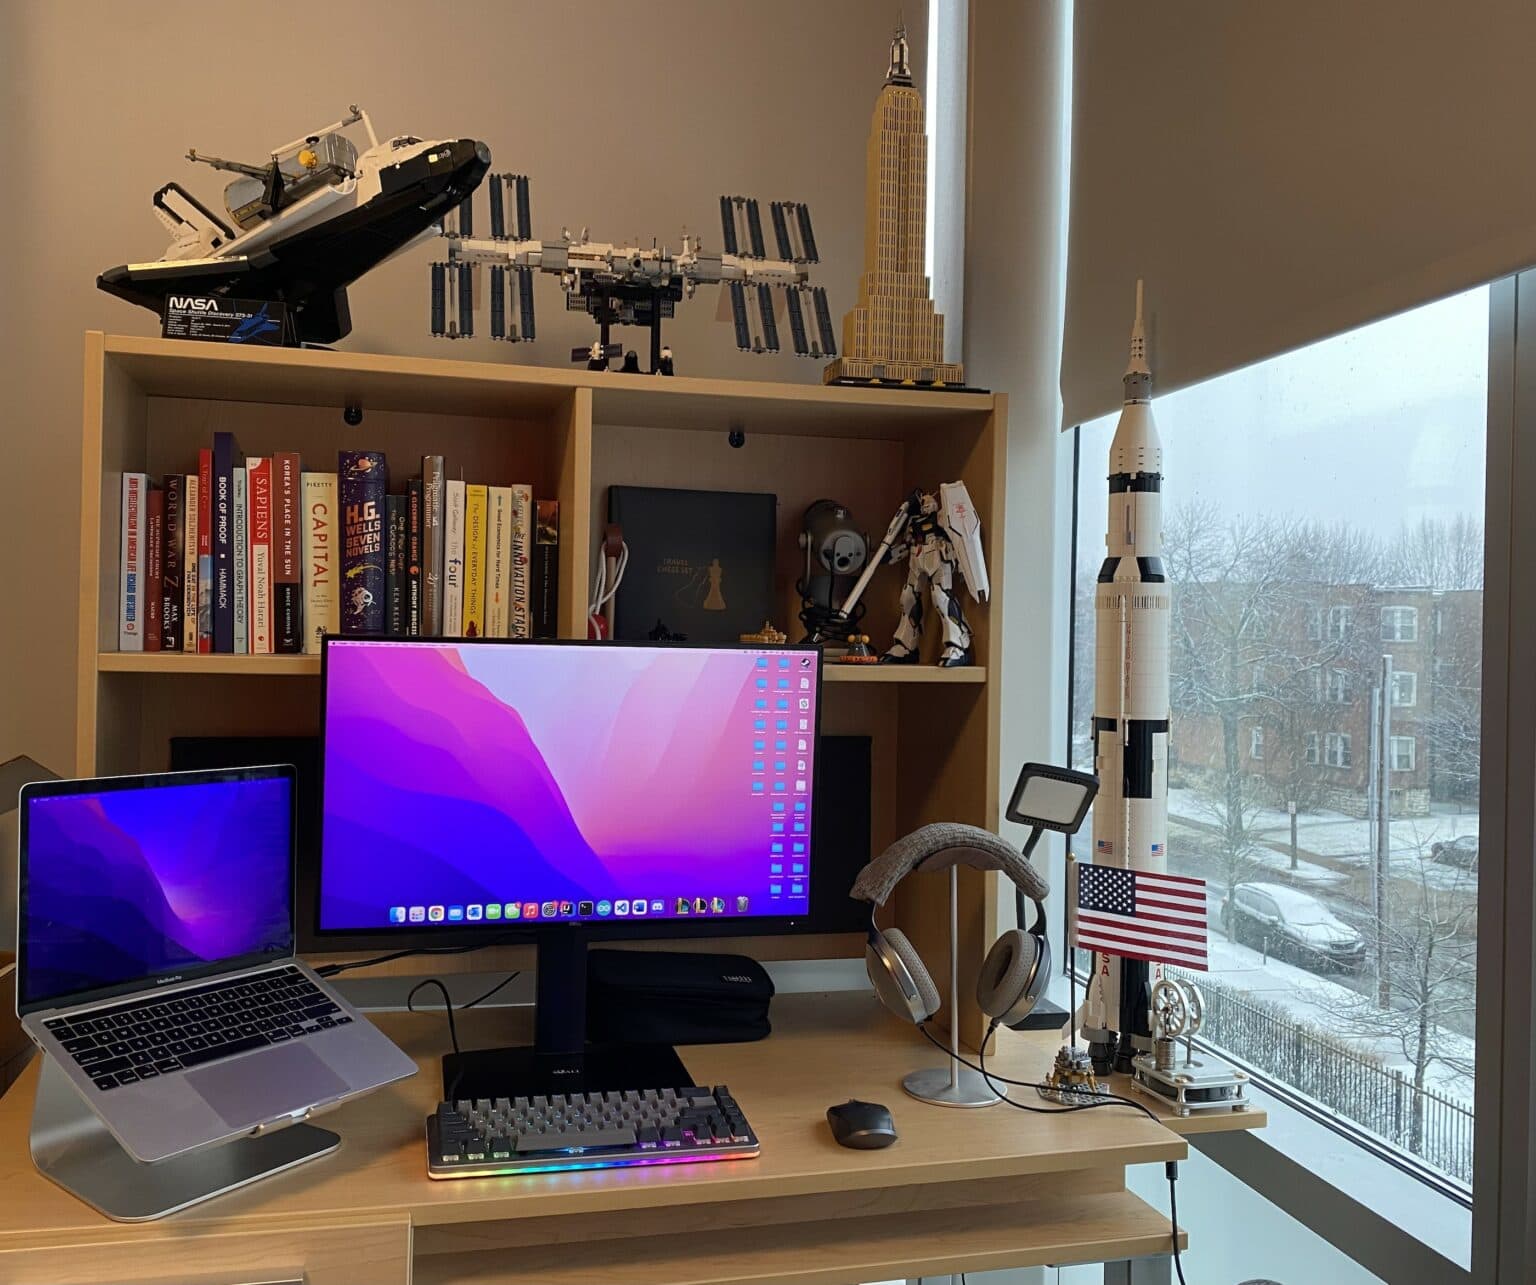 The college kid who owns this computer setup might be headed for an aerospace-related career.